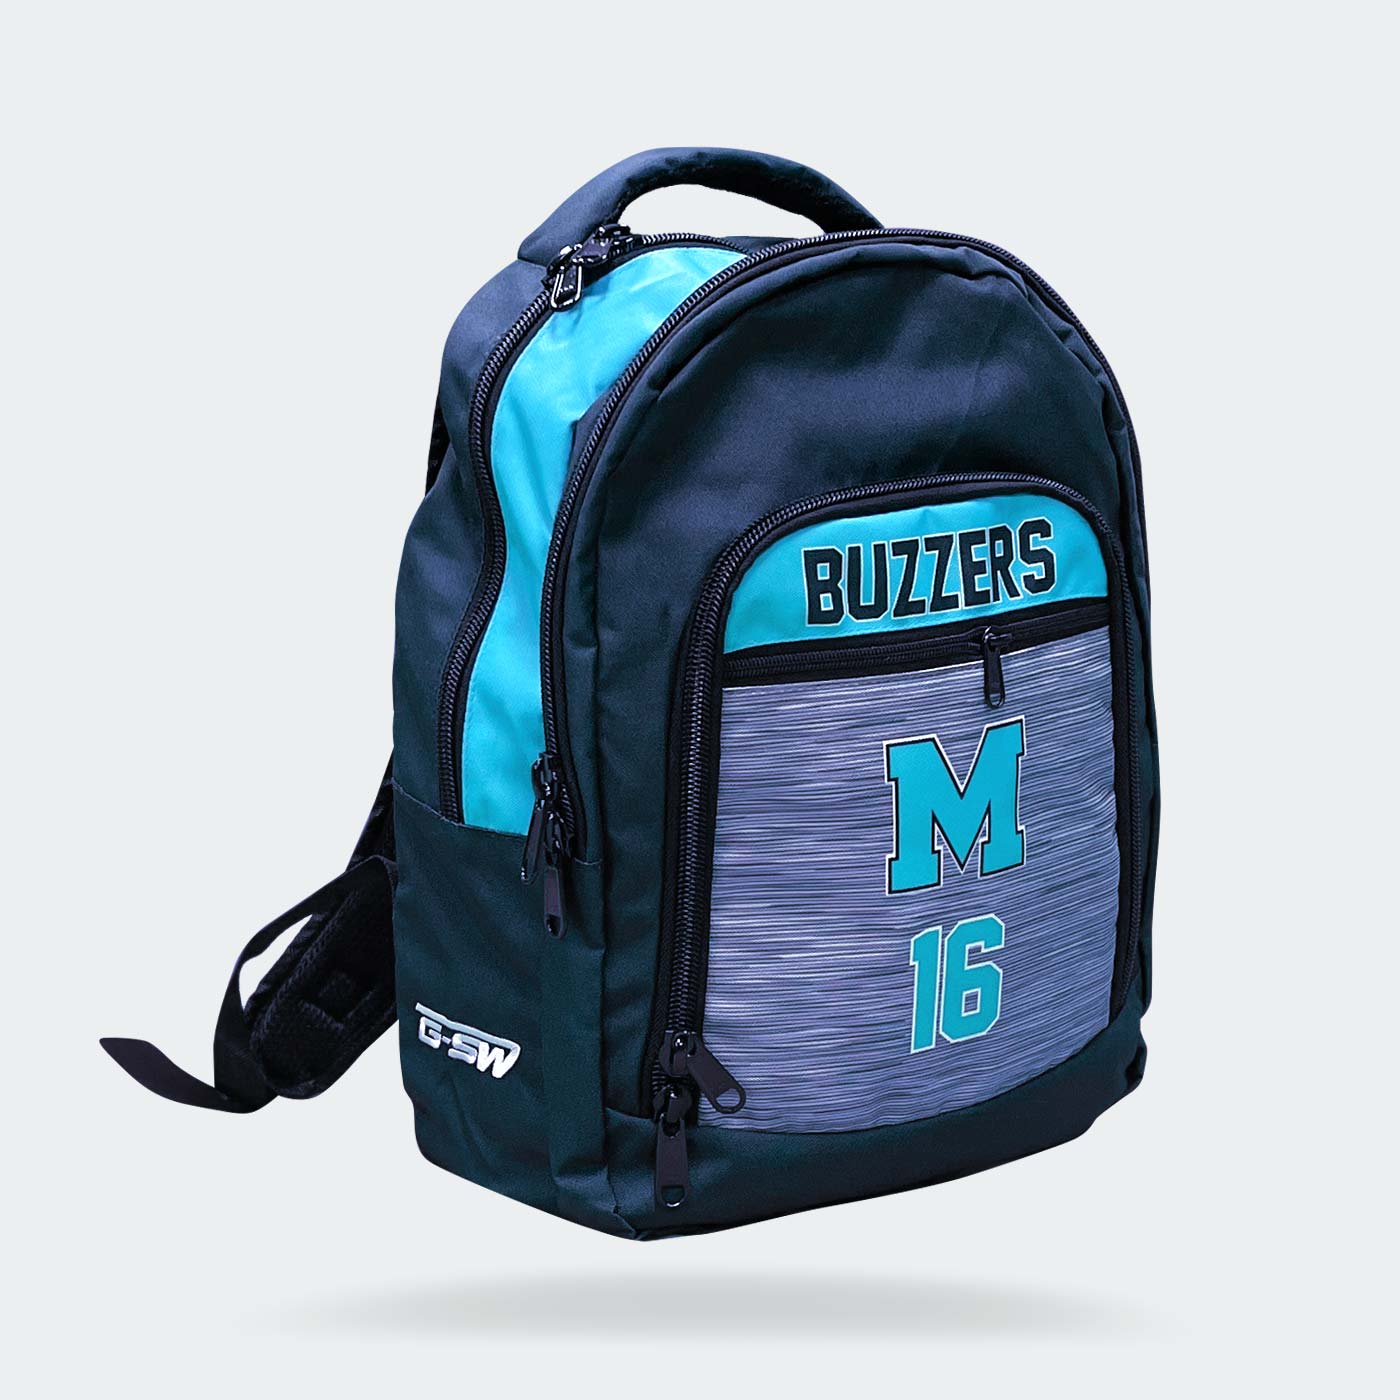 Buzzers Sublimated Backpack